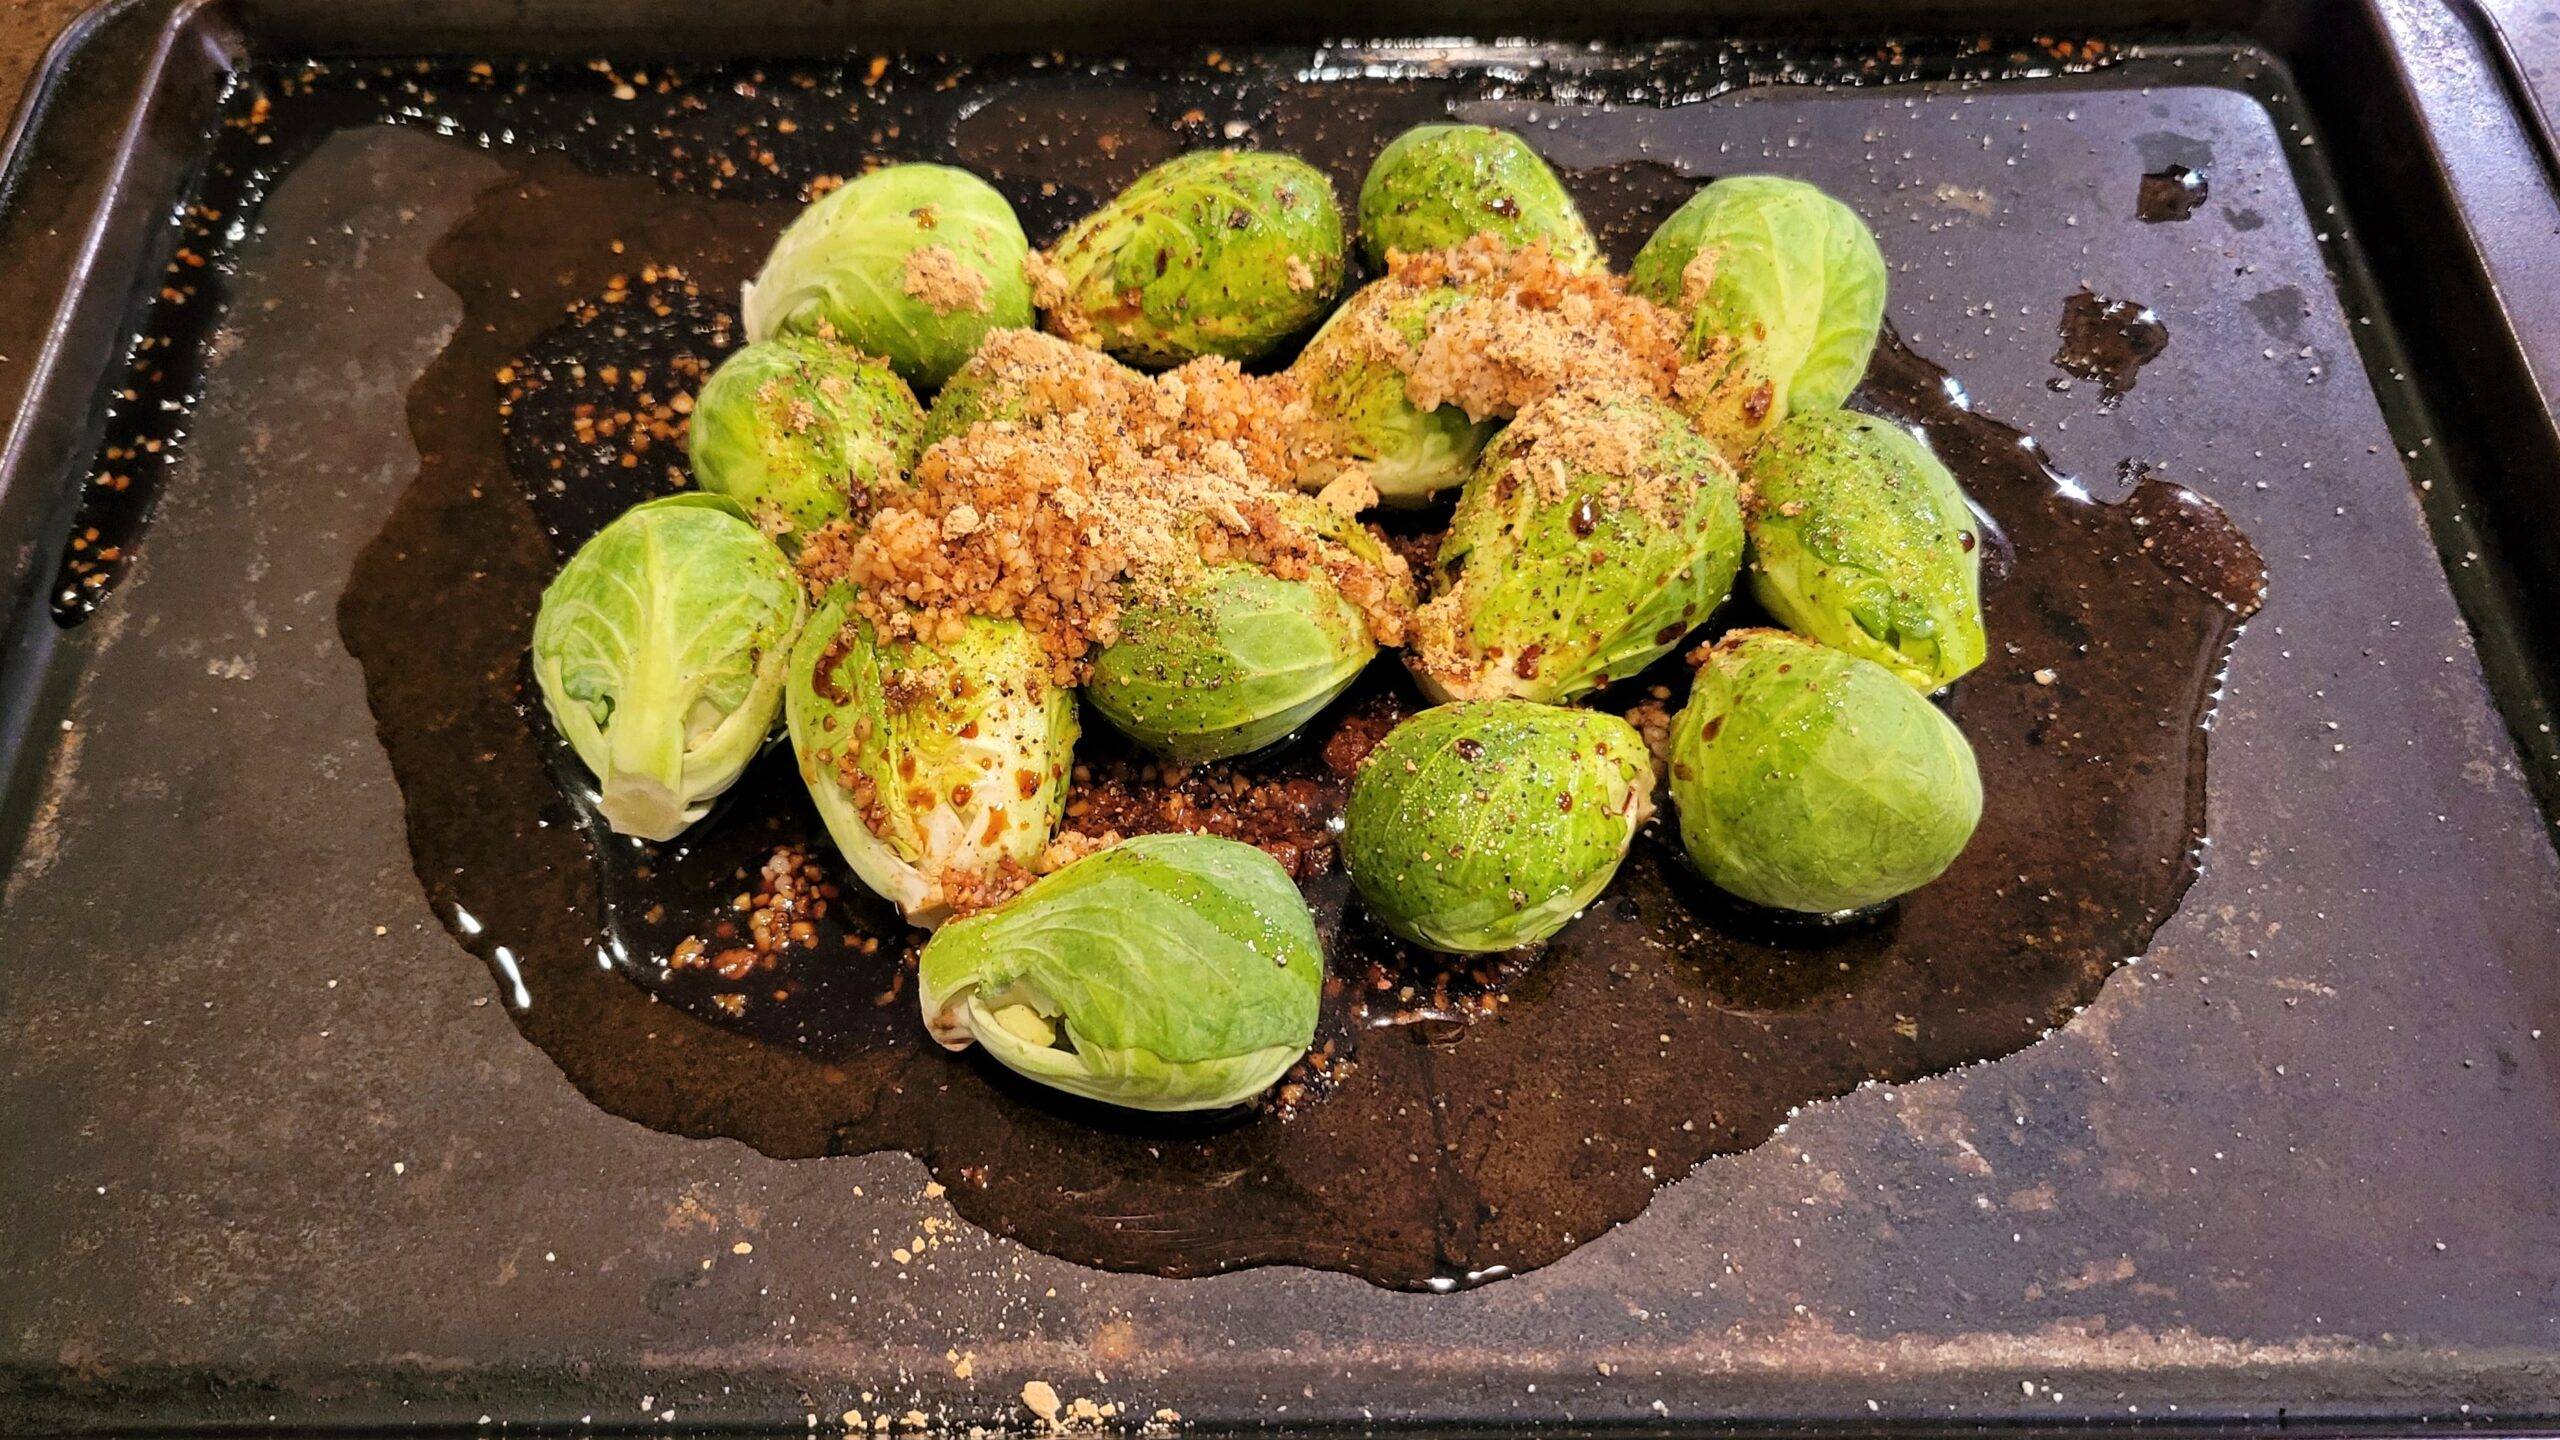 Fresh Brussels Sprouts - Dining in with Danielle